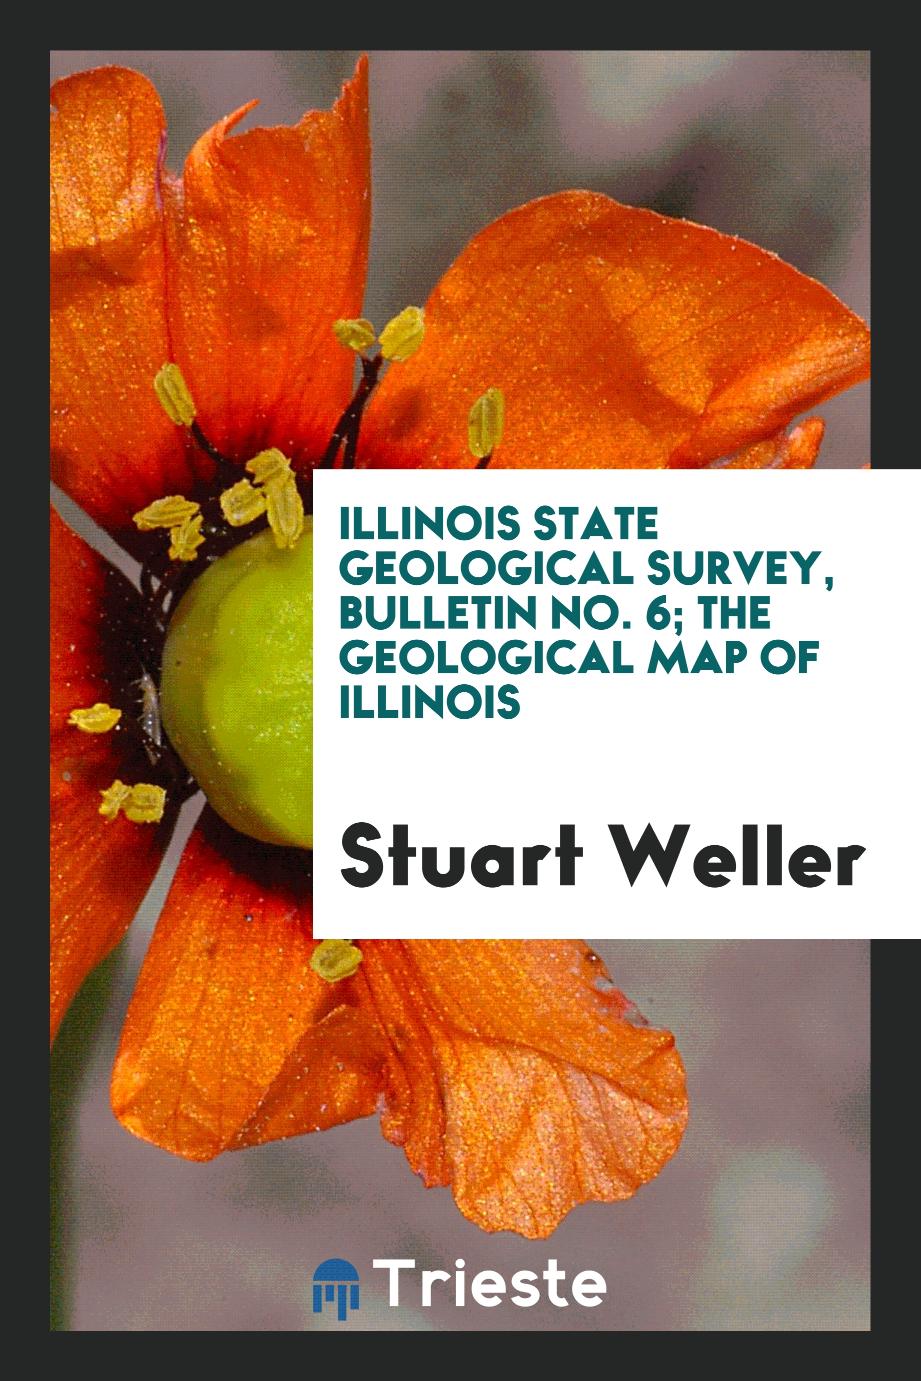 Illinois State Geological Survey, Bulletin No. 6; The Geological Map of Illinois